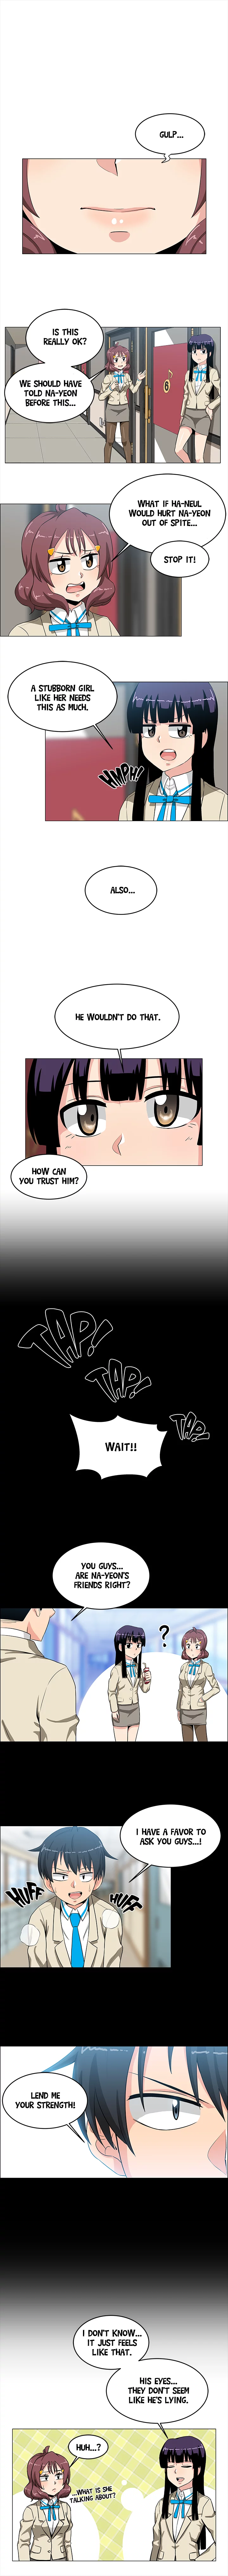 Whatever You Say, I Won't! - Chapter 22 Page 5